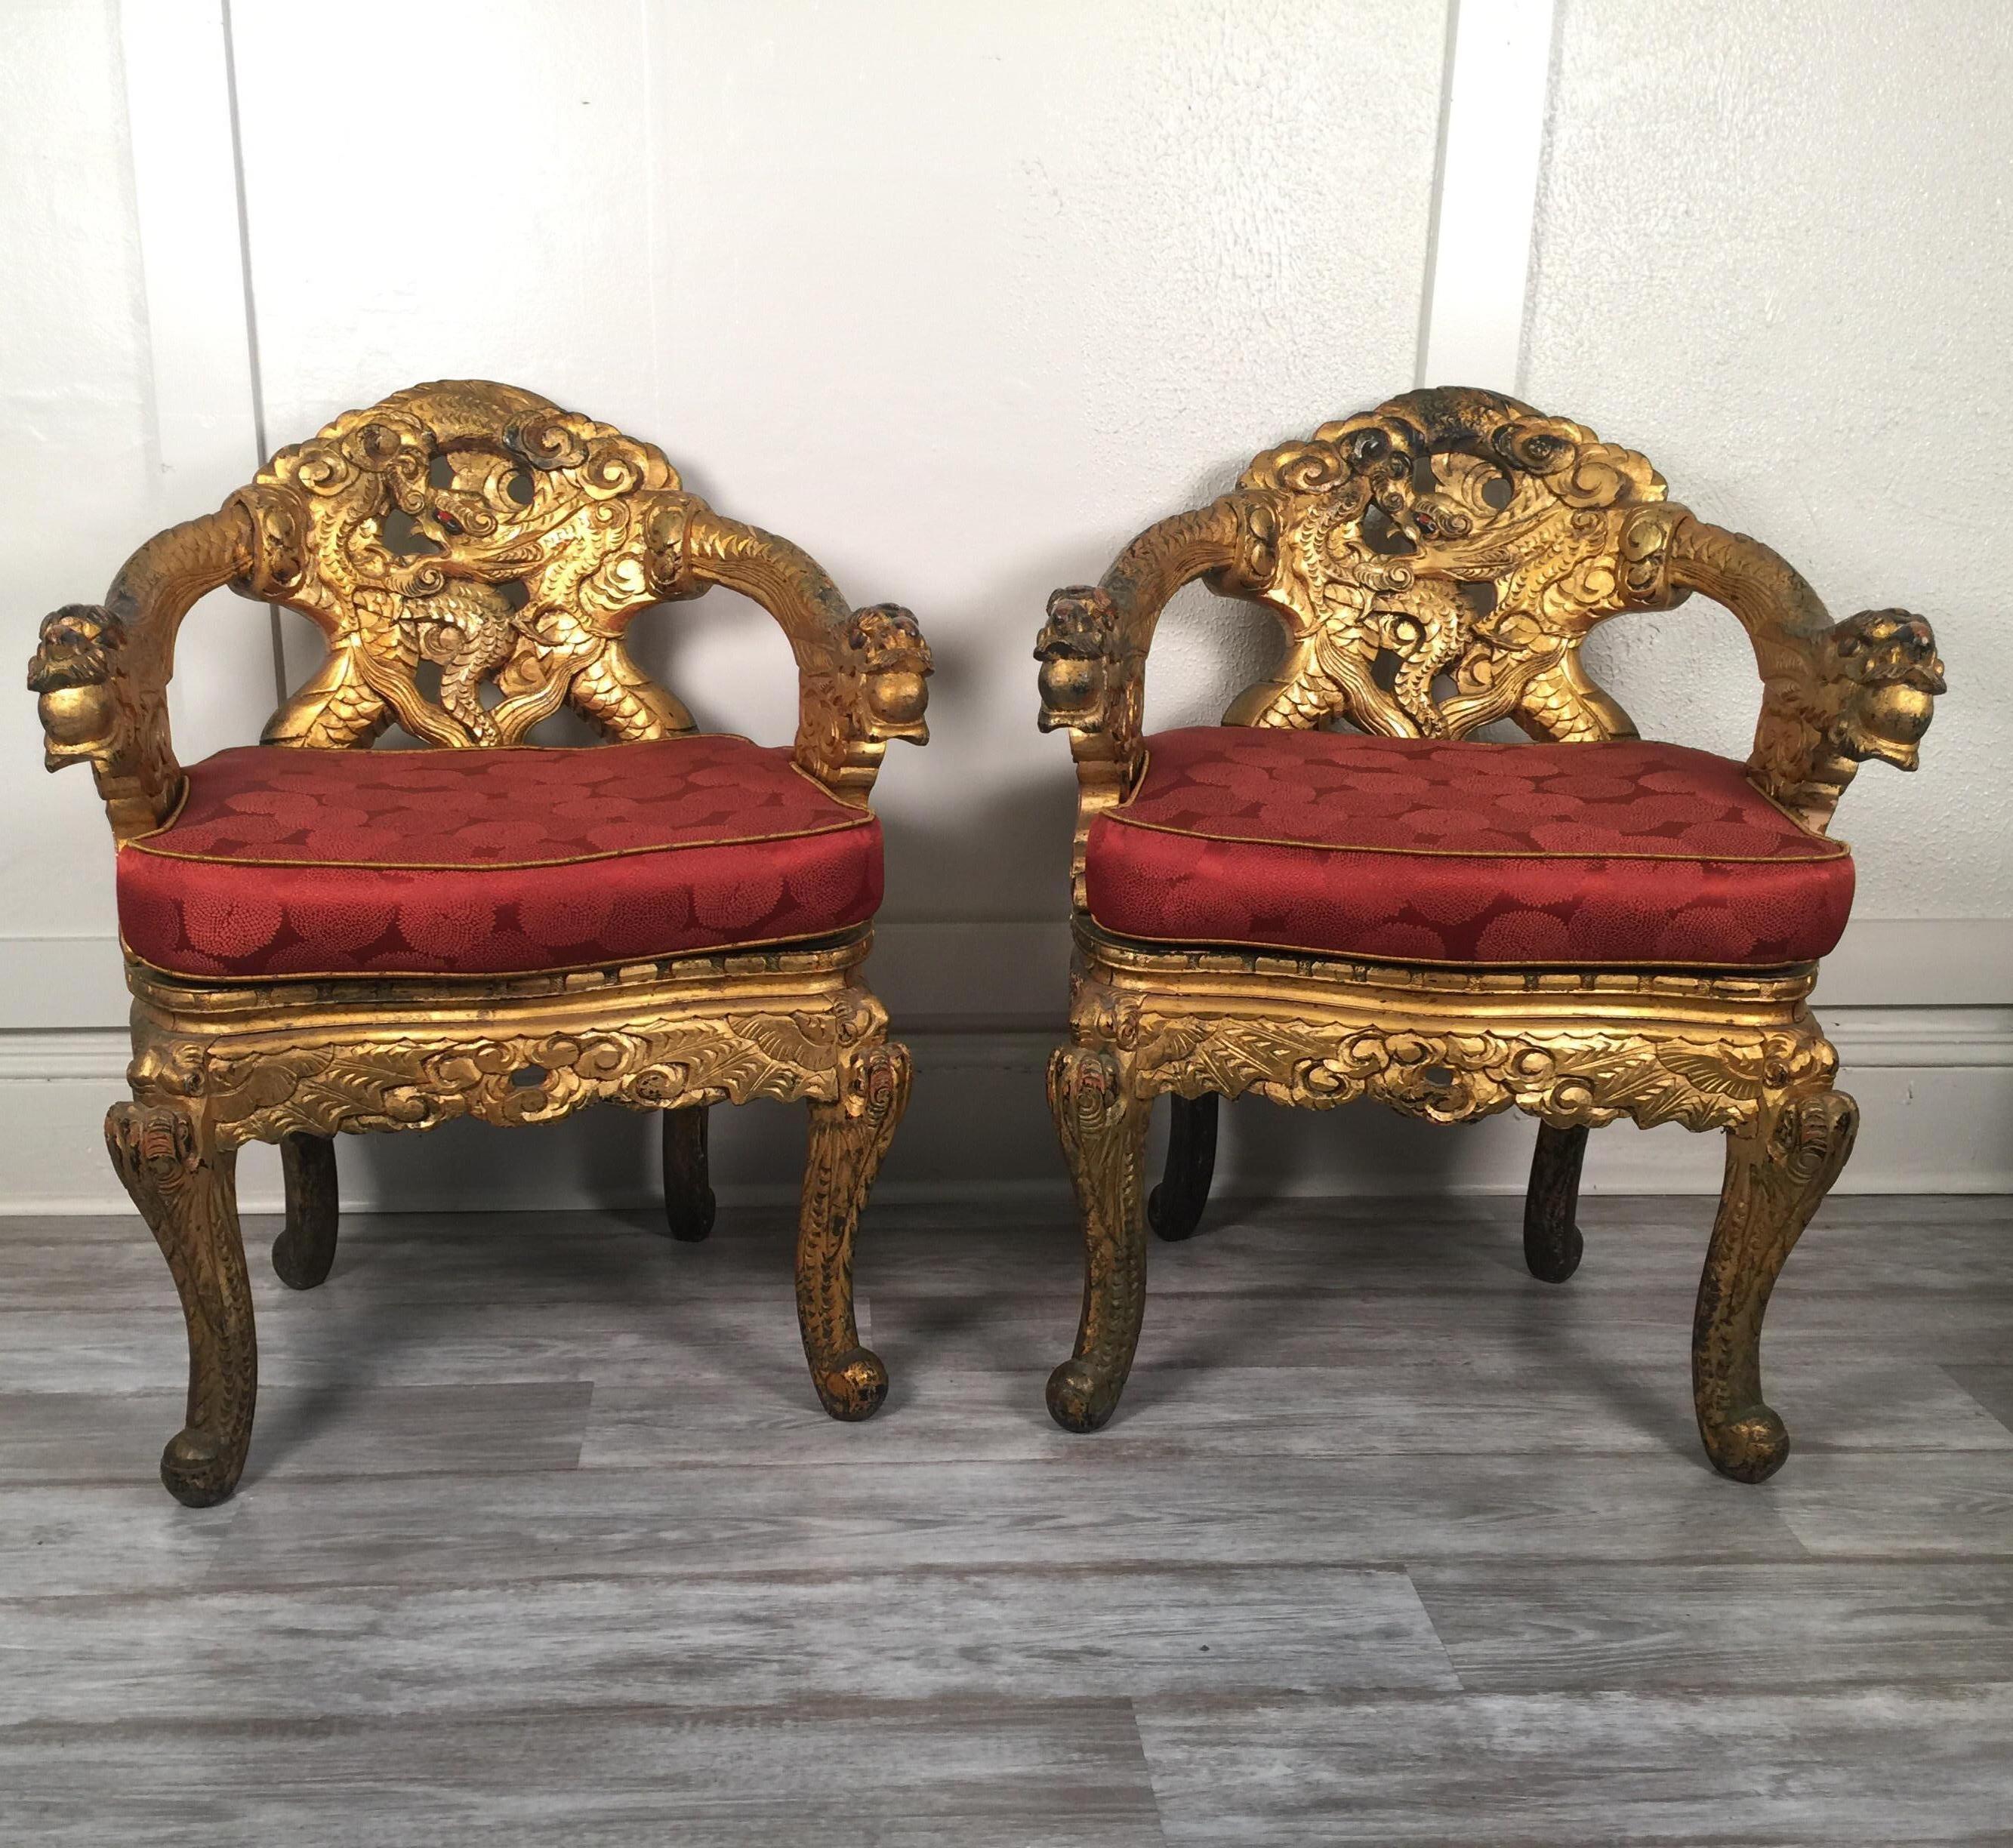 A pair of early 20th century Japanese caved armchairs with custom silk cushions. The chairs with carved dragons along the curved backs and curved legs are in a Chinese style from a much earlier period. The surface with gold wear showing the black